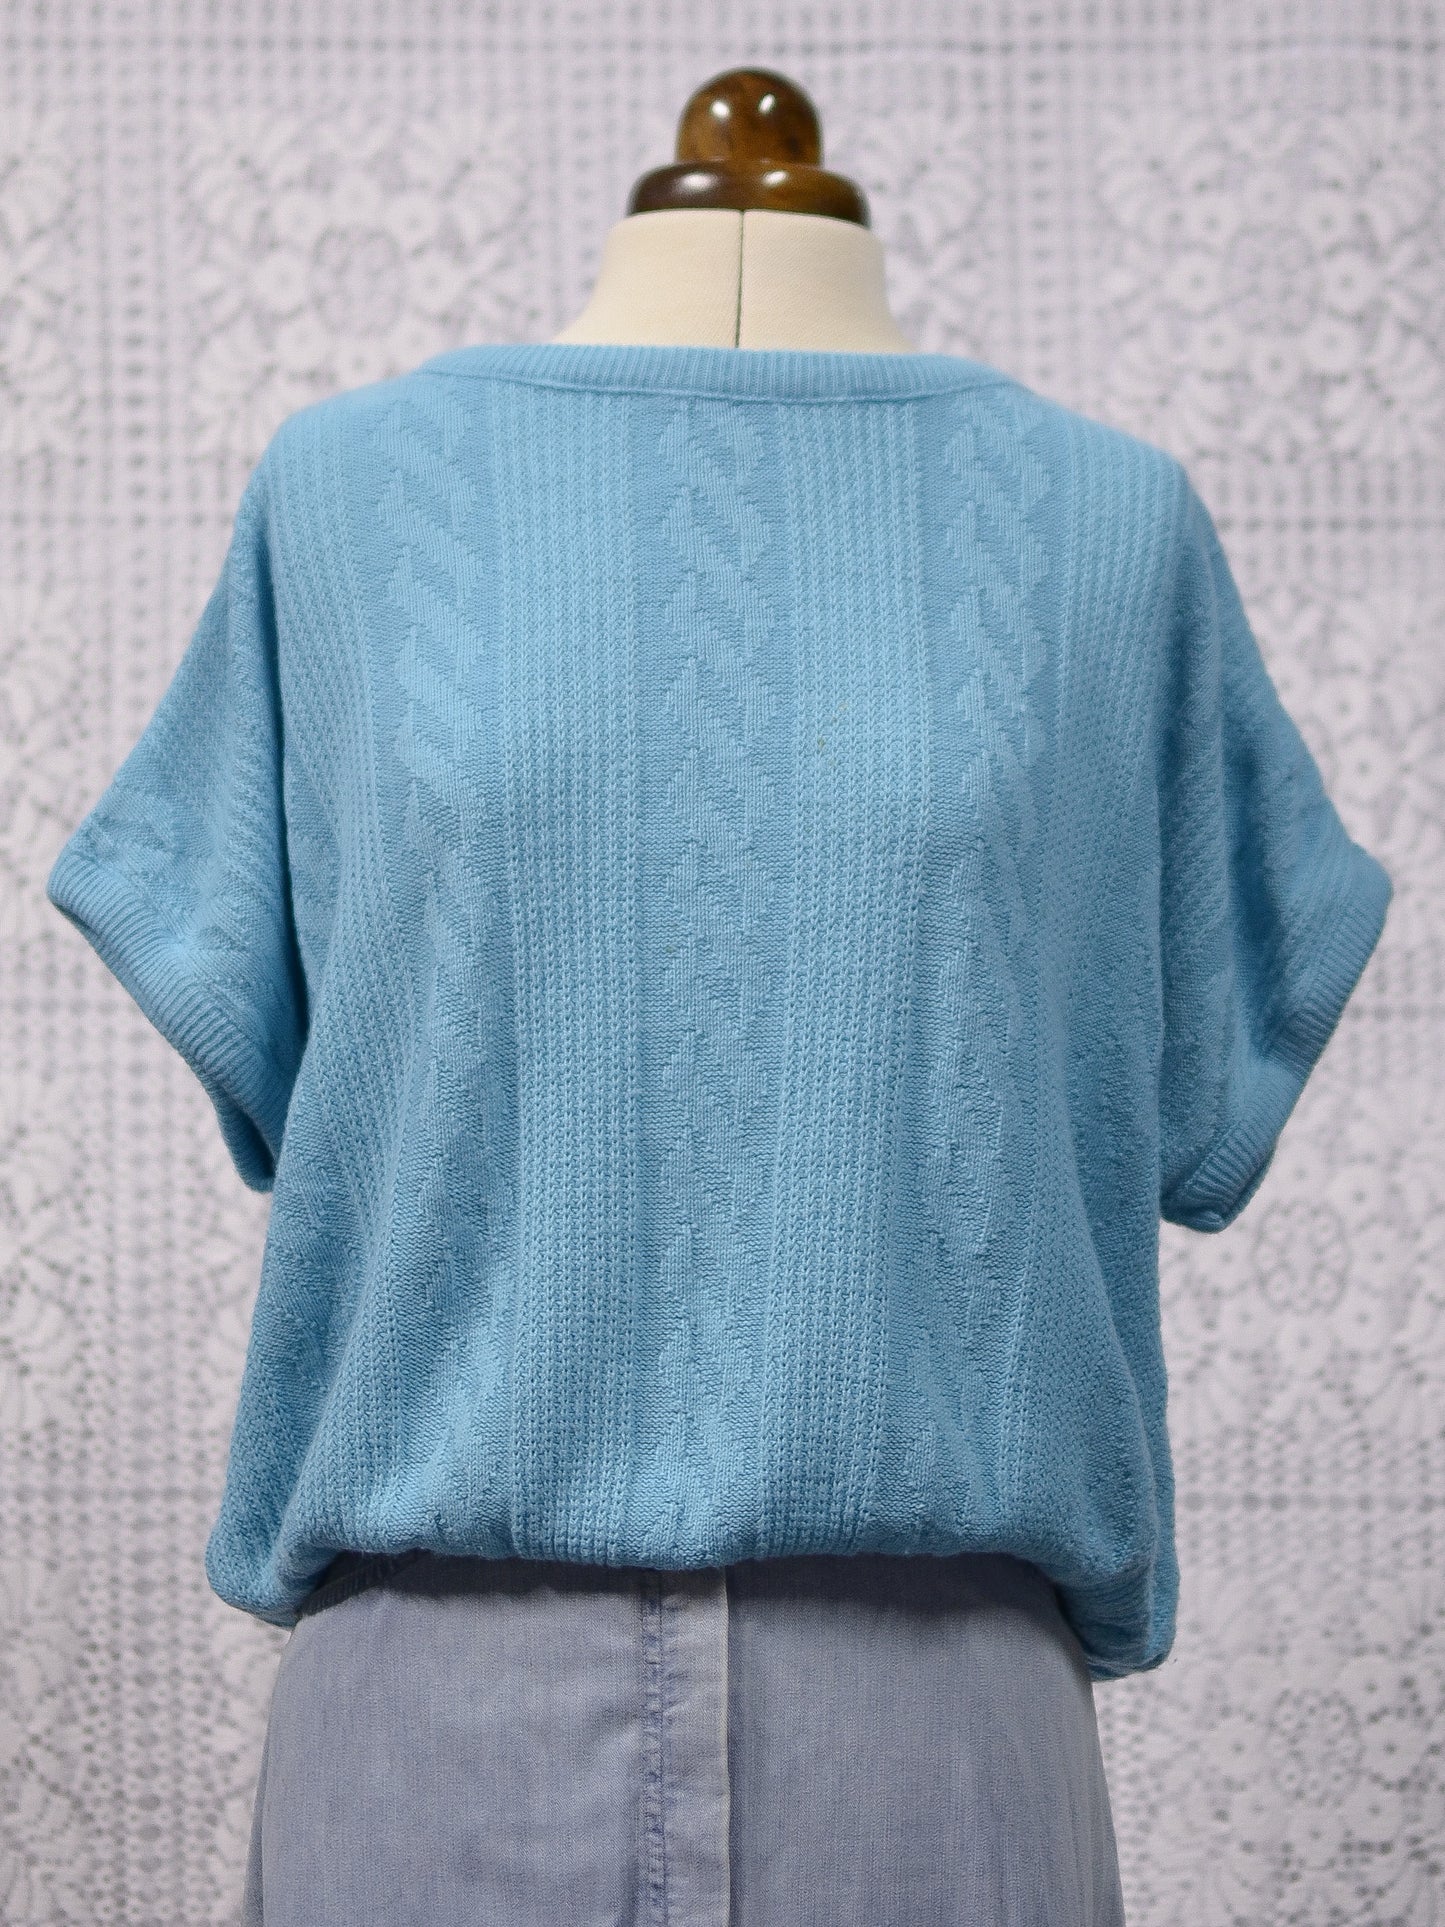 1980s turquoise slouchy sleeveless jumper